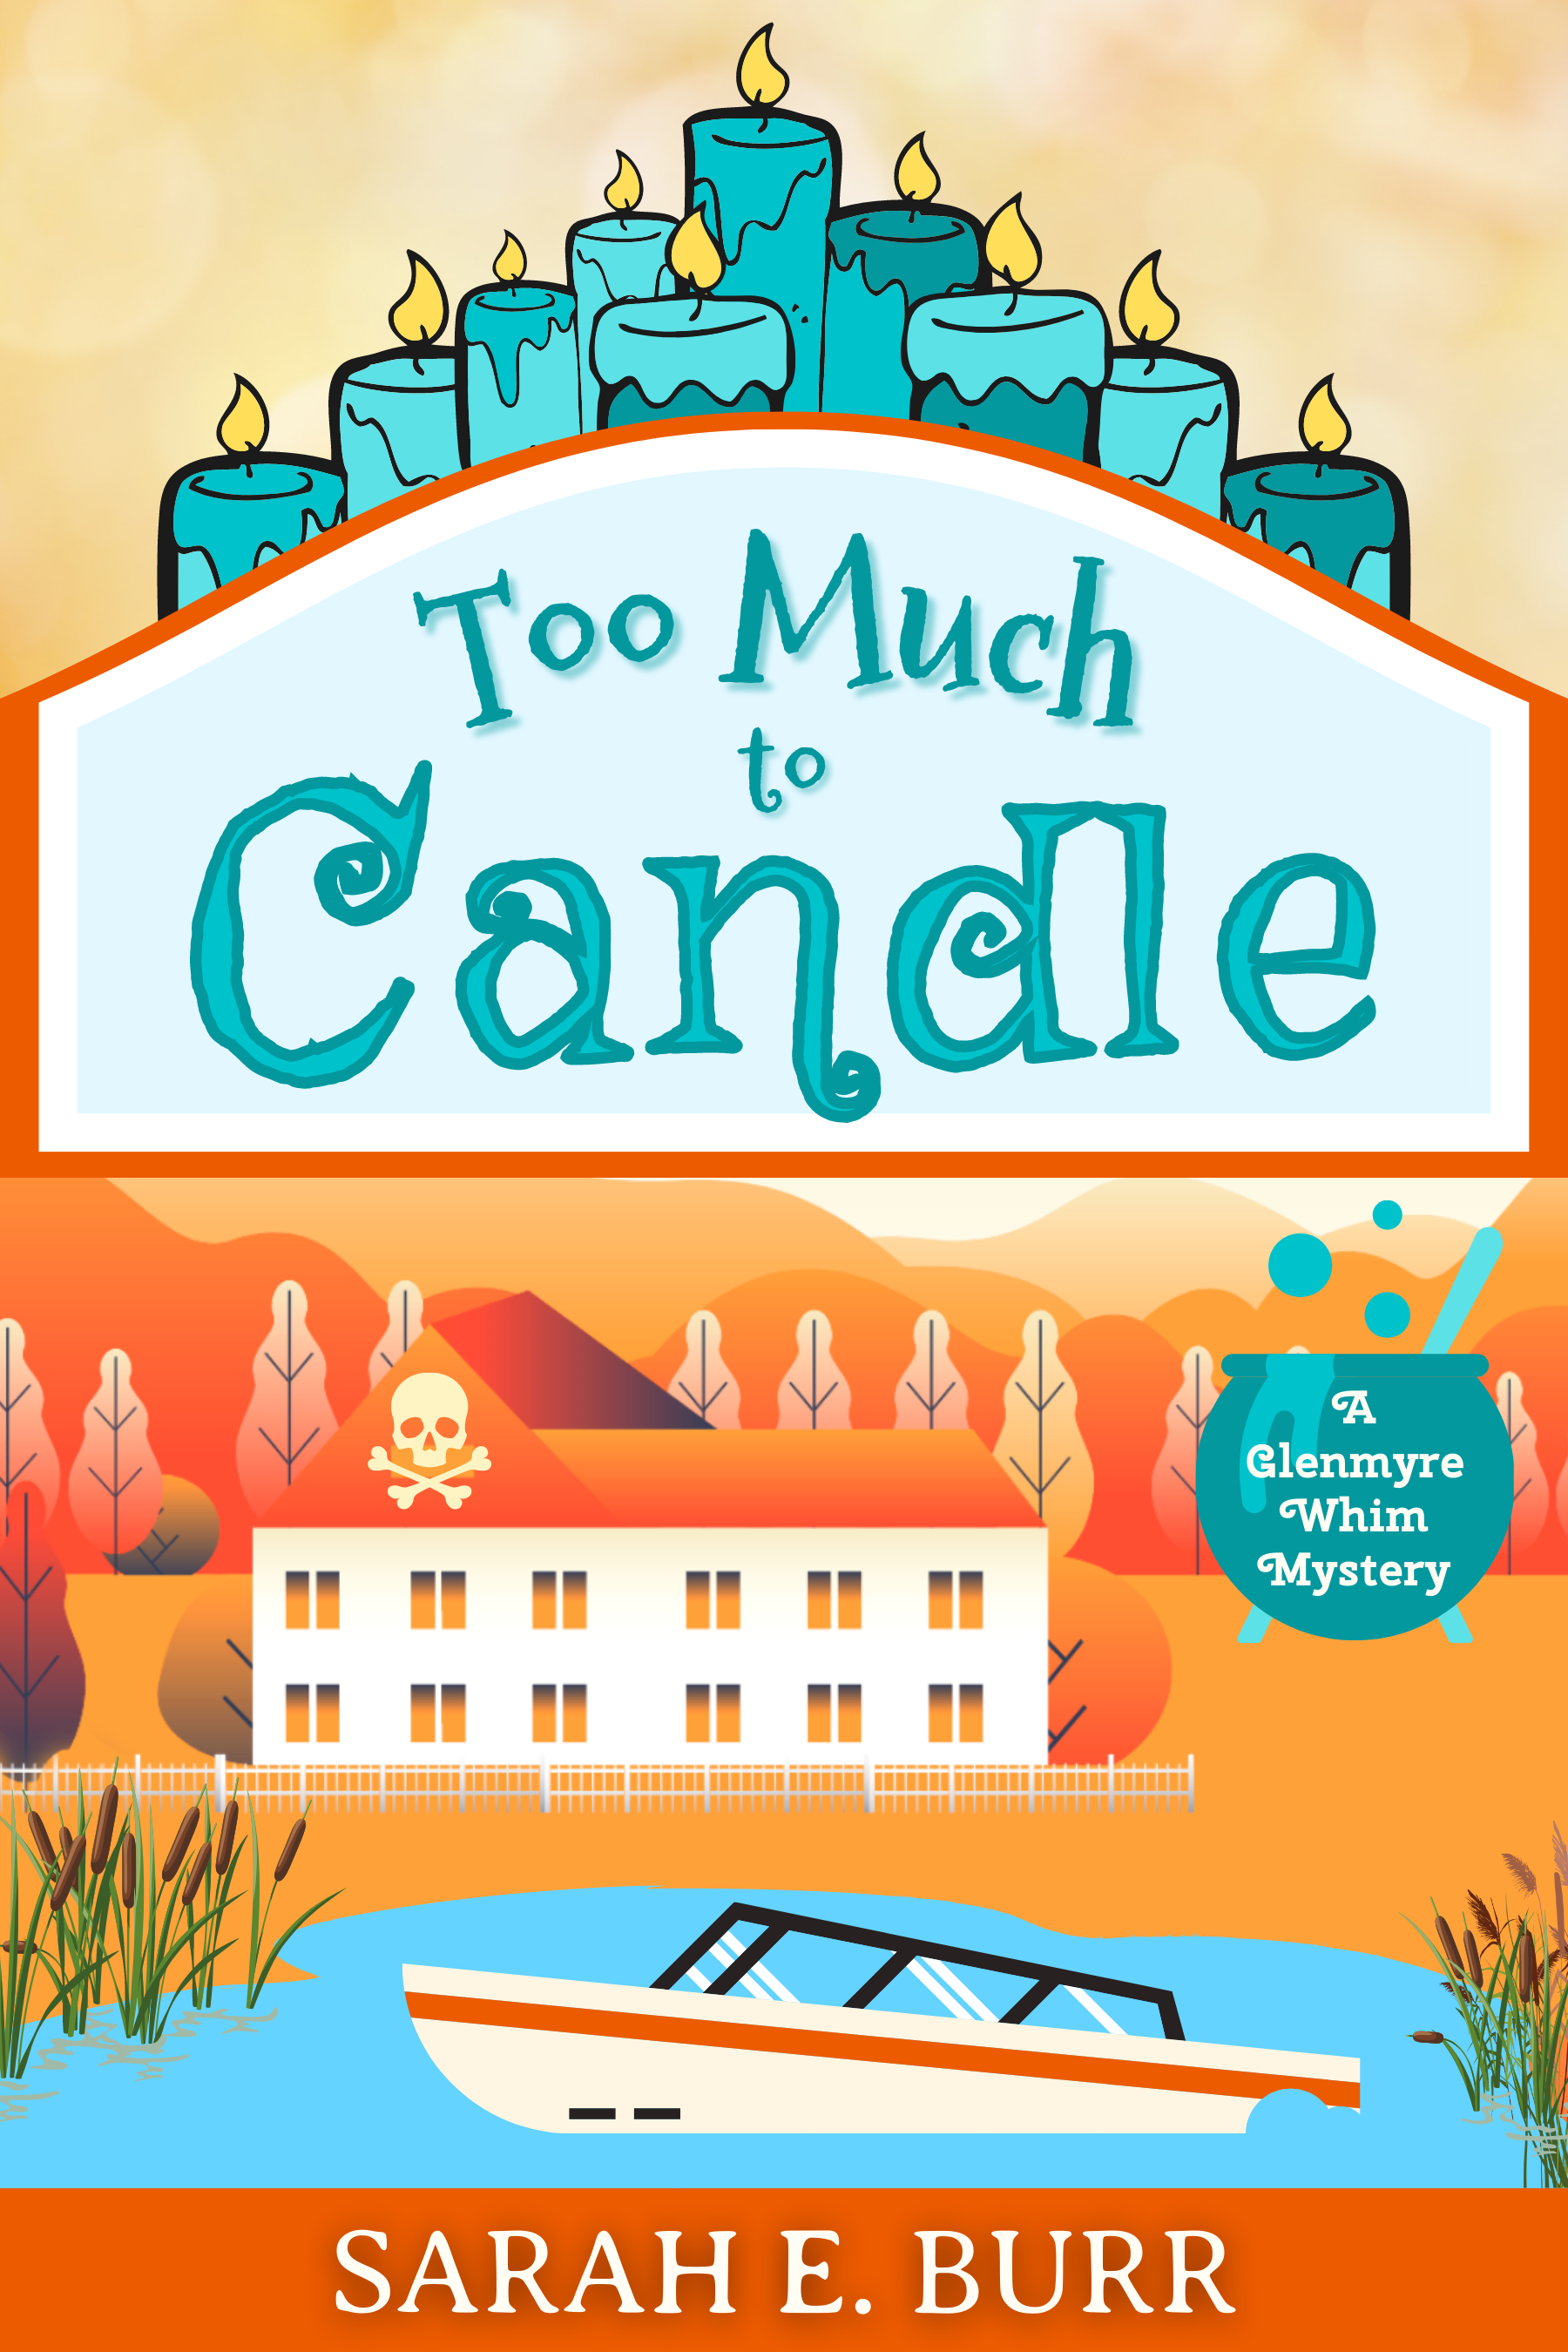 FINAL_Too Much to Candle Cover_2022.png